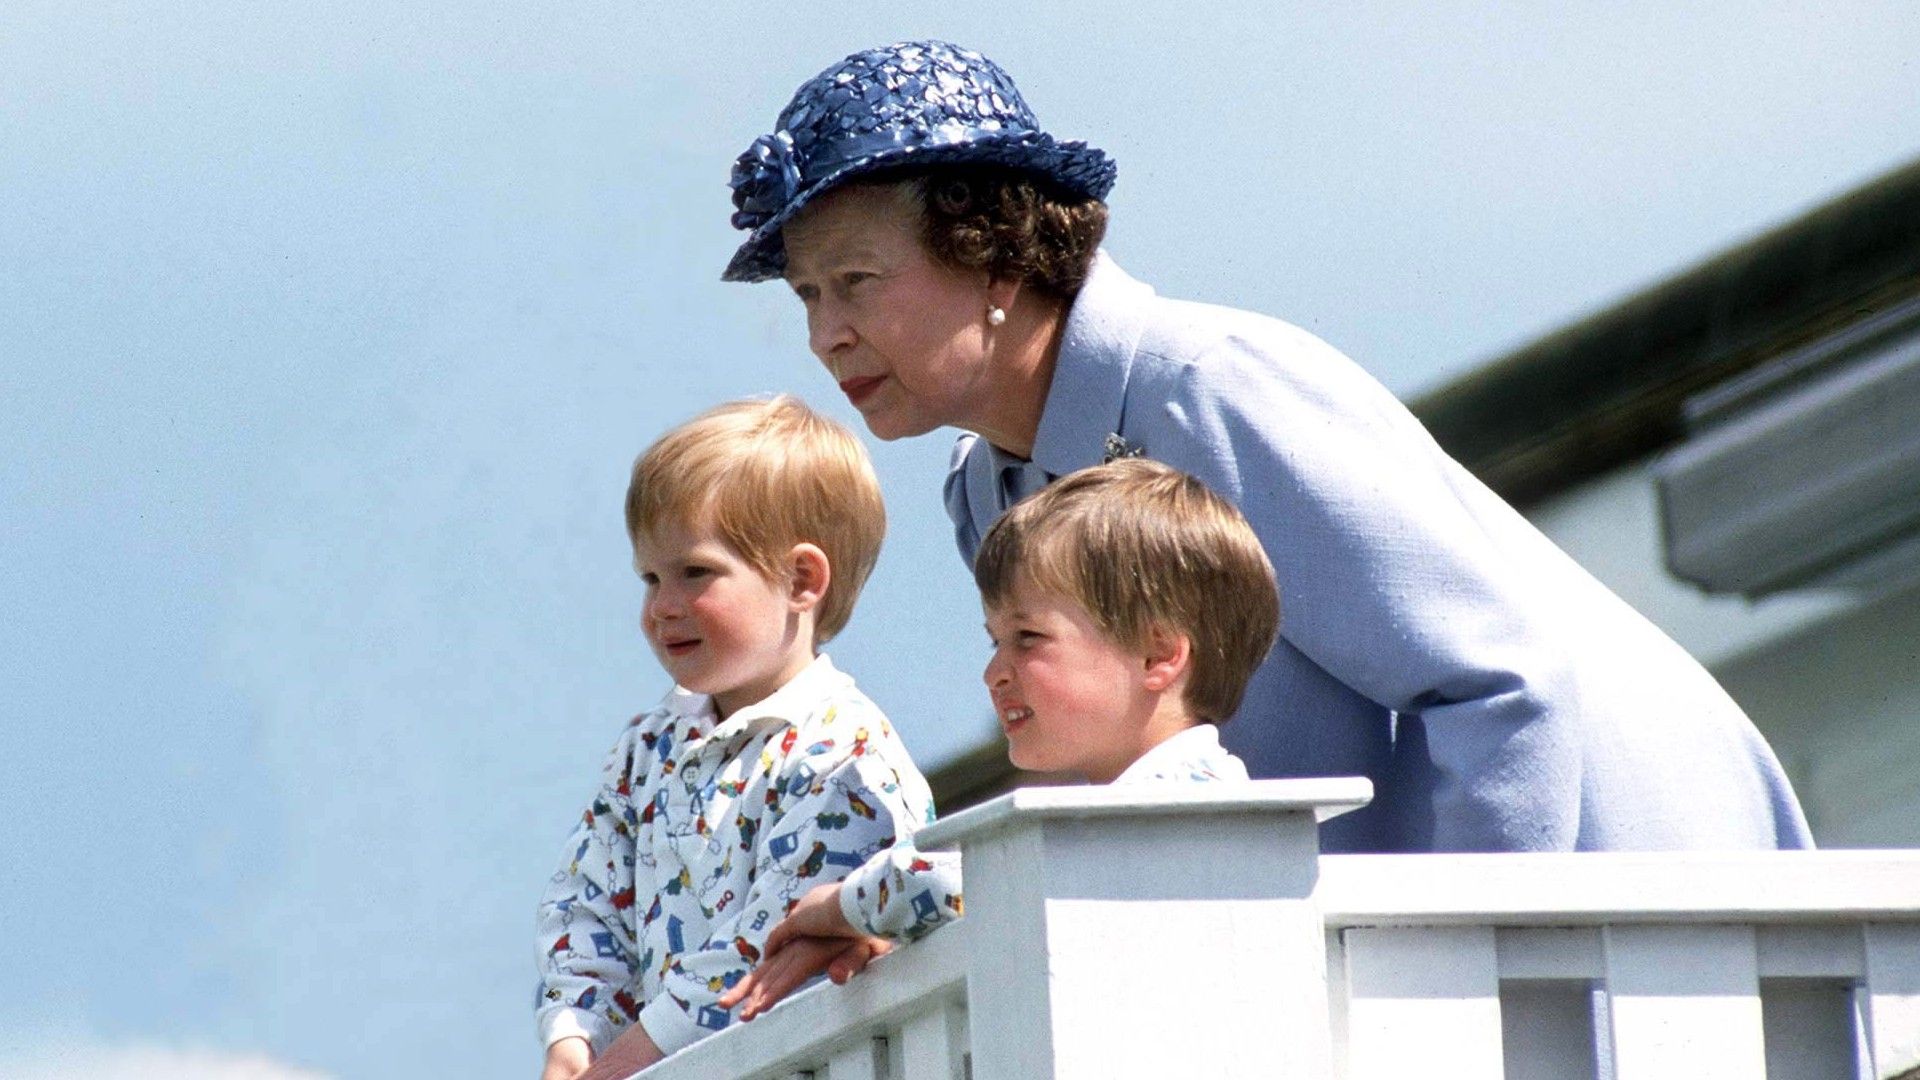 <p>                     To most people, Queen Elizabeth II was an icon - a permanent presence for a history-making 70 years on the throne.                   </p>                                      <p>                     However, for the likes of a young Prince William and Prince Harry in 1987, she was just their grandmother. The couple enjoyed what appeared to be a fun day out at the Polo, smiling and listening intently as the horse-mad monarch shared her wisdom with her grandsons.                   </p>